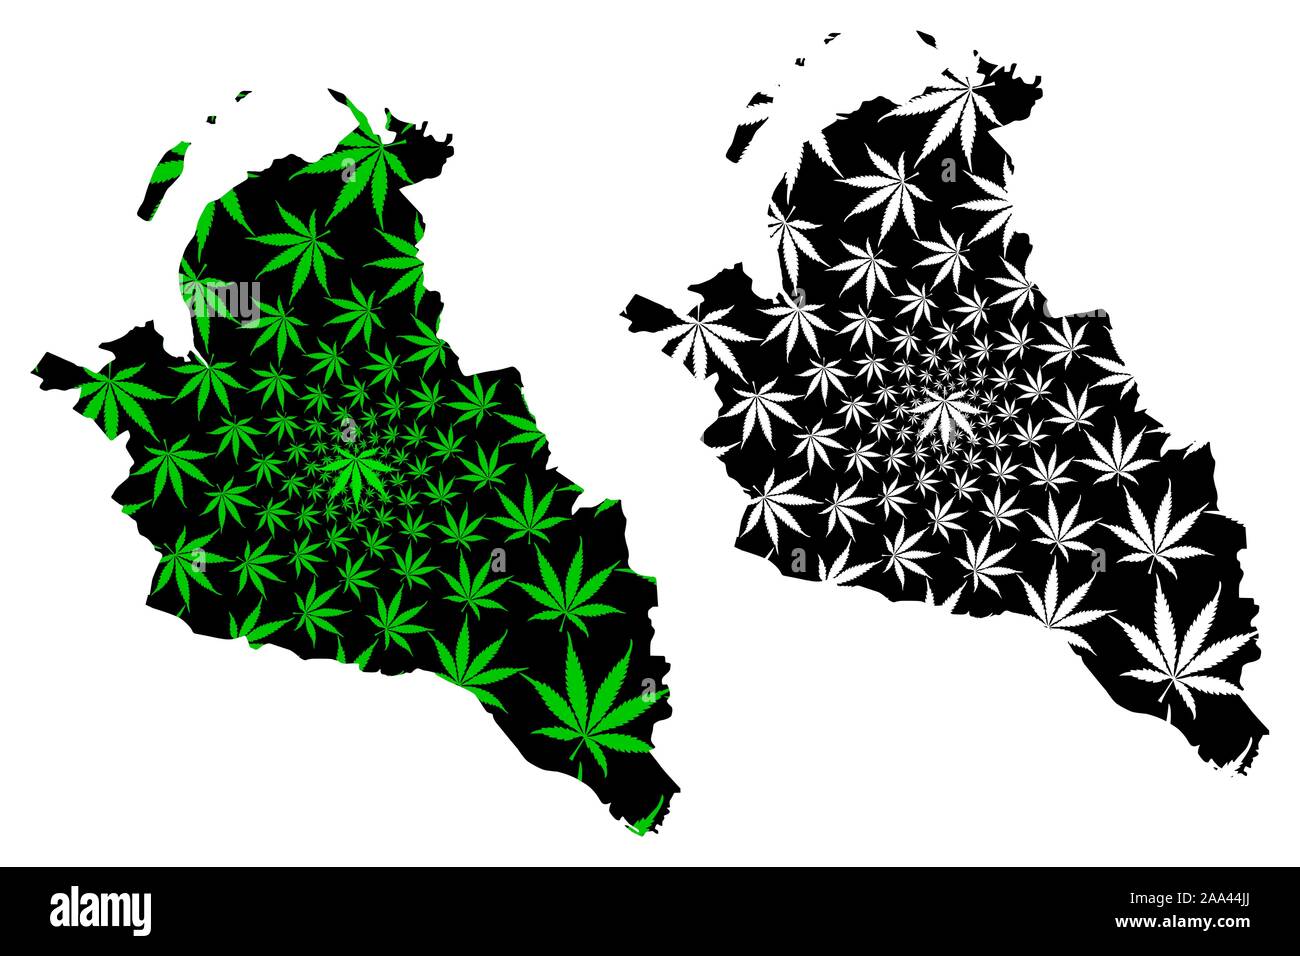 West Dunbartonshire (United Kingdom, Scotland, Local government in Scotland) map is designed cannabis leaf green and black, Dumbarton and Clydebank ma Stock Vector